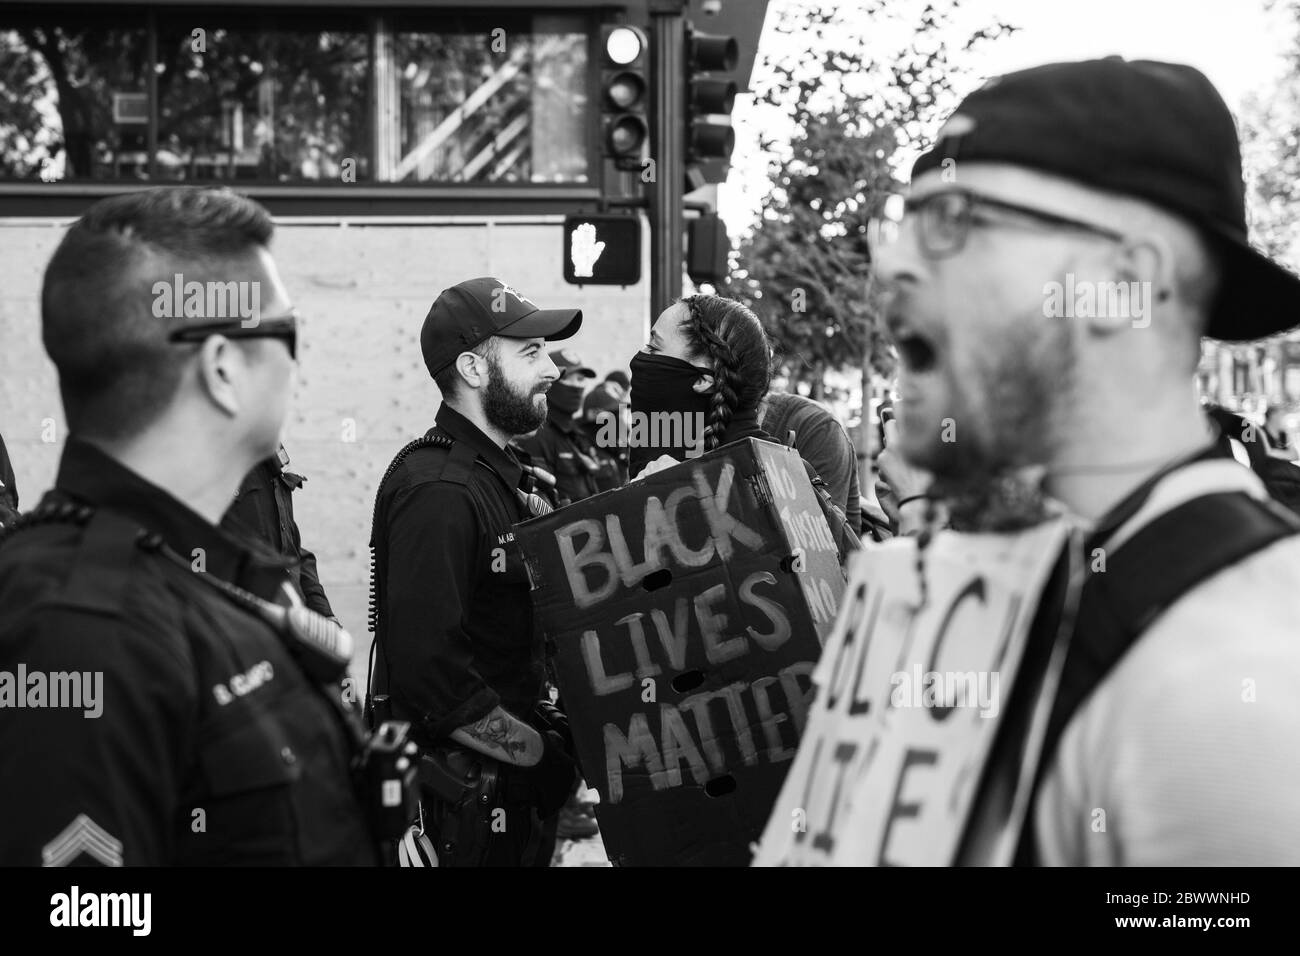 Oakland, Ca. 2nd June, 2020. An Oakland Police Officer and a protestor have a staredown near the Oakland Police Department in Oakland, California on June 2, 2020 after the death of George Floyd. Credit: Chris Tuite/Image Space/Media Punch/Alamy Live News Stock Photo